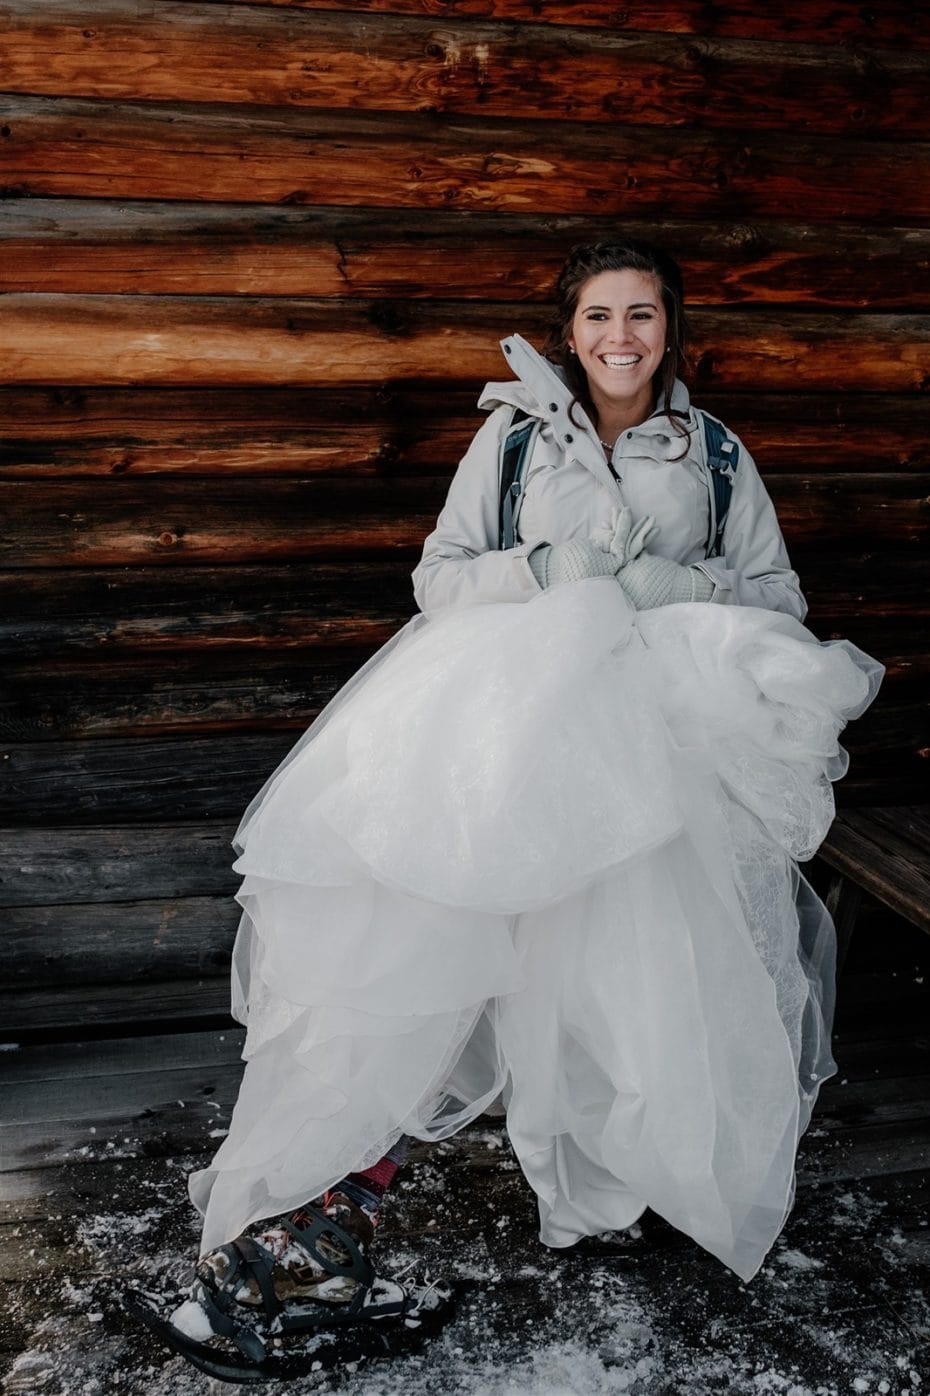 A smiling bride wearing a ski jacket, wedding dress and snowshoes